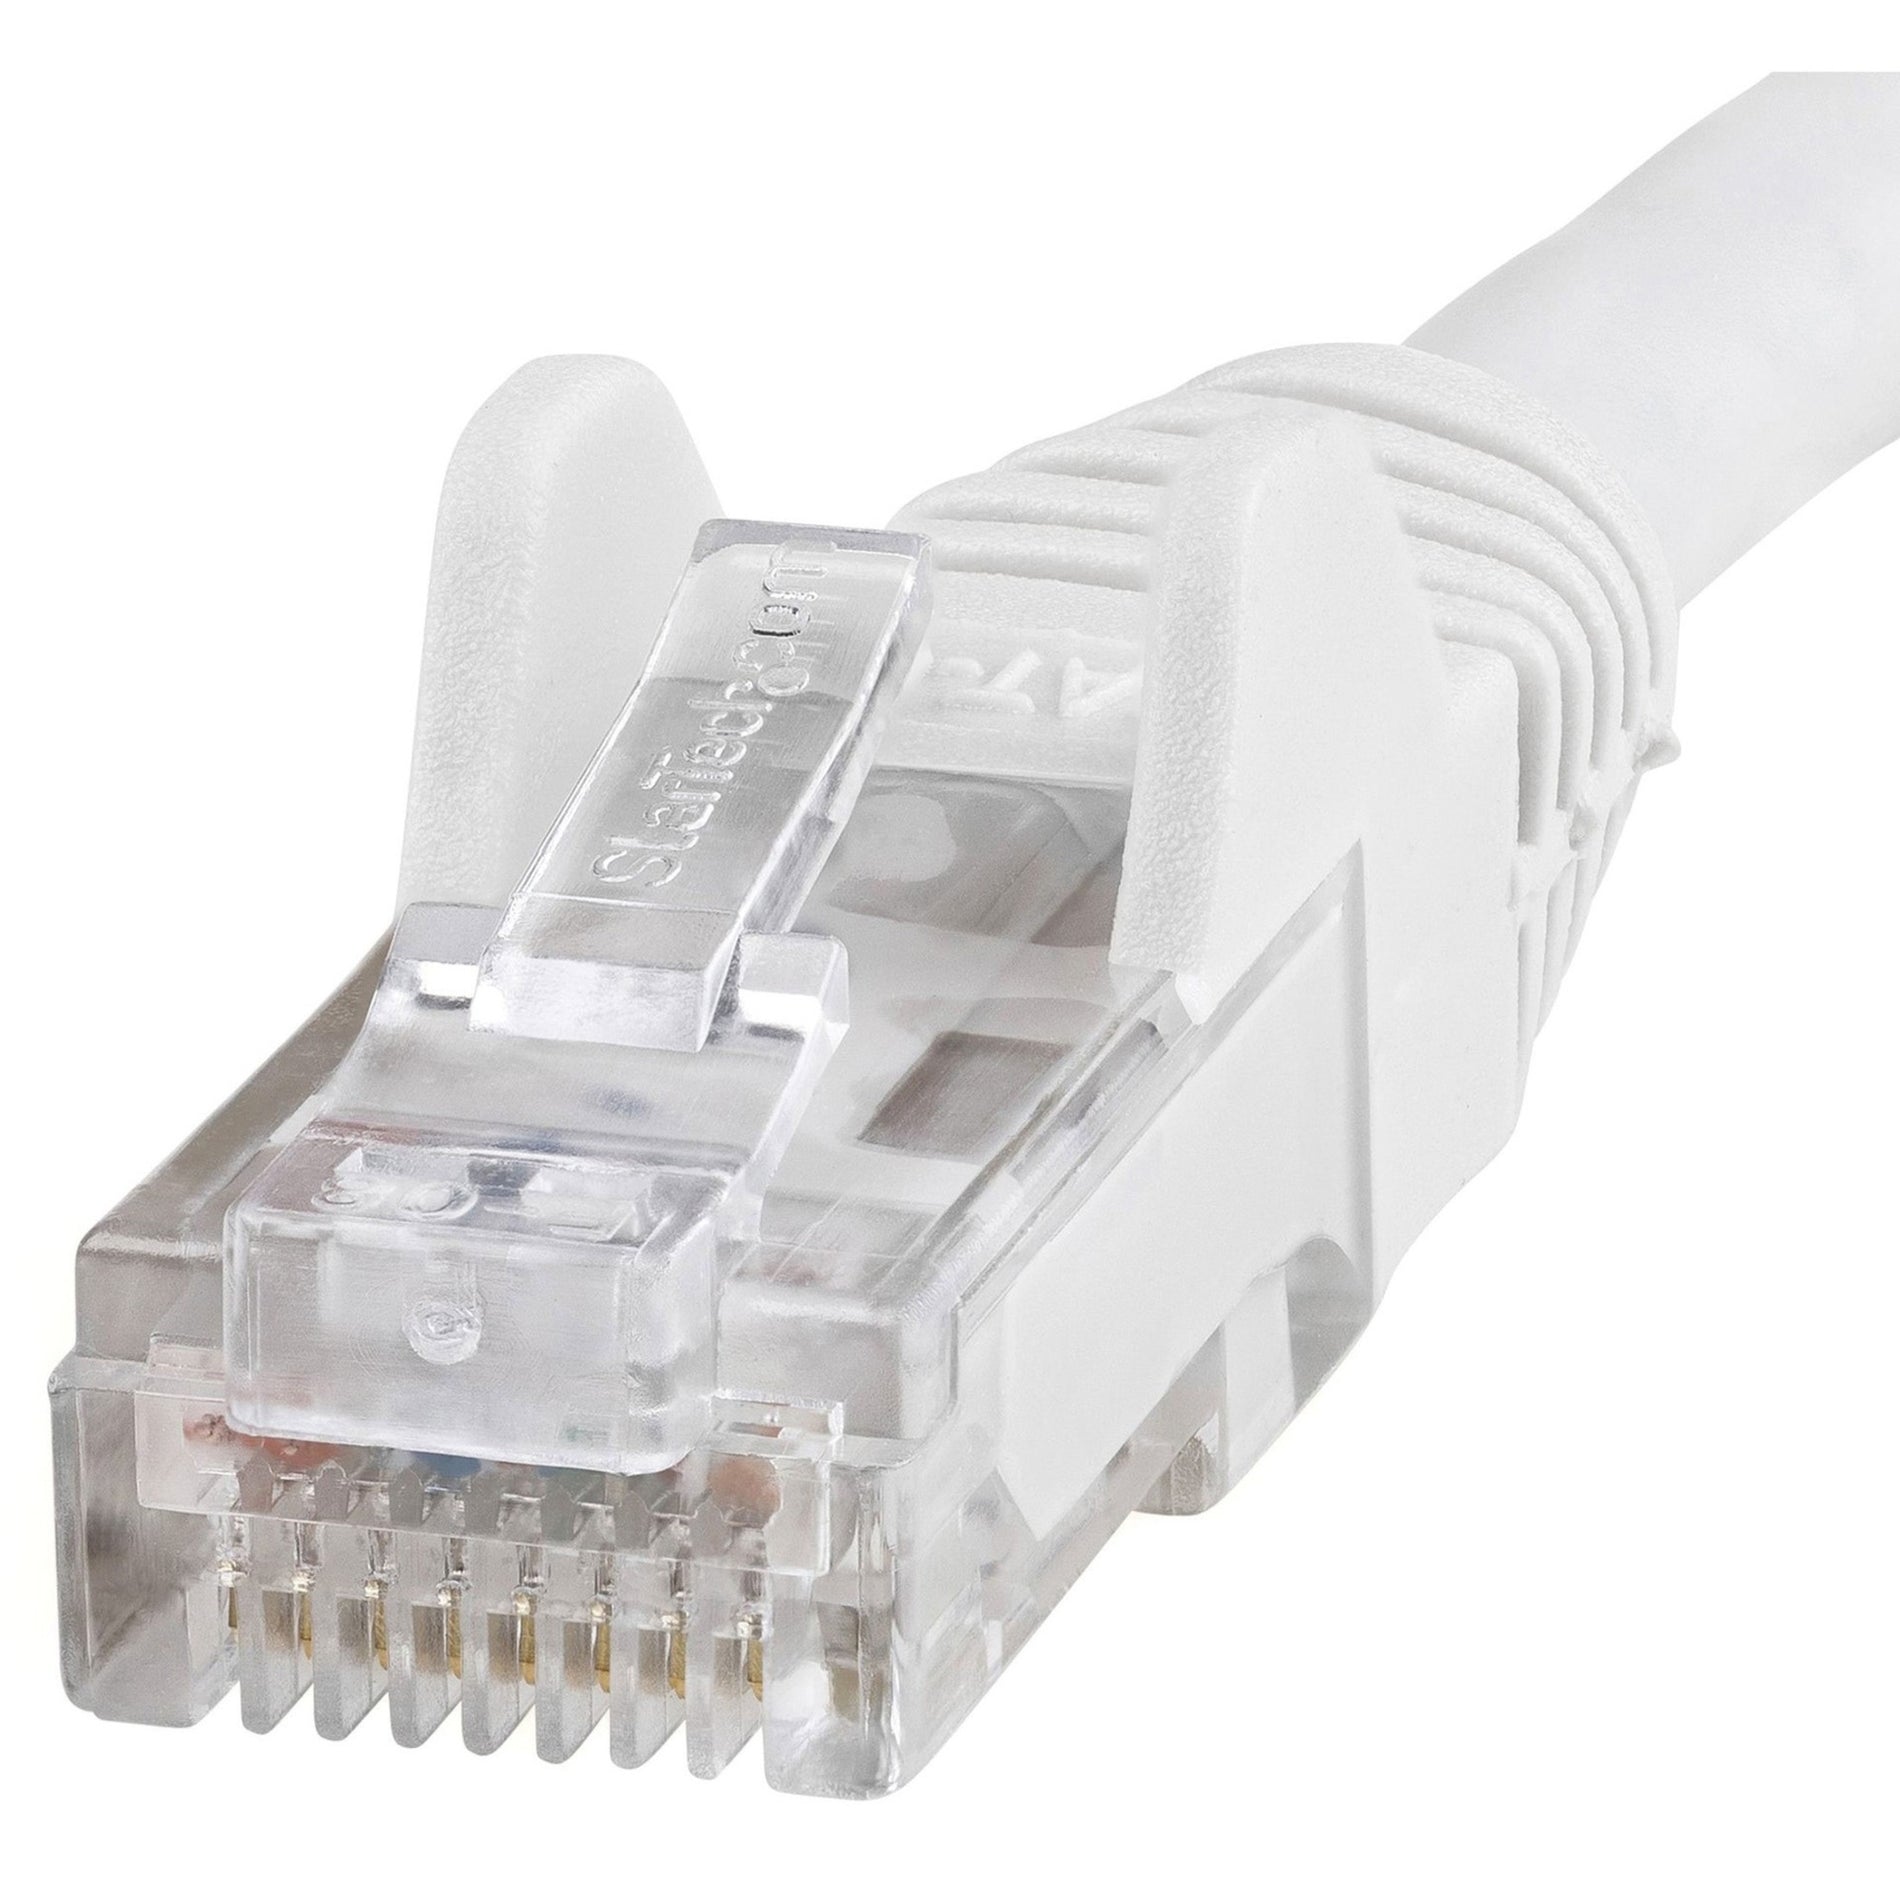 StarTech.com N6PATCH8WH Cat6 Patch Cable, 8 ft White Ethernet Cable with Snagless RJ45 Connectors